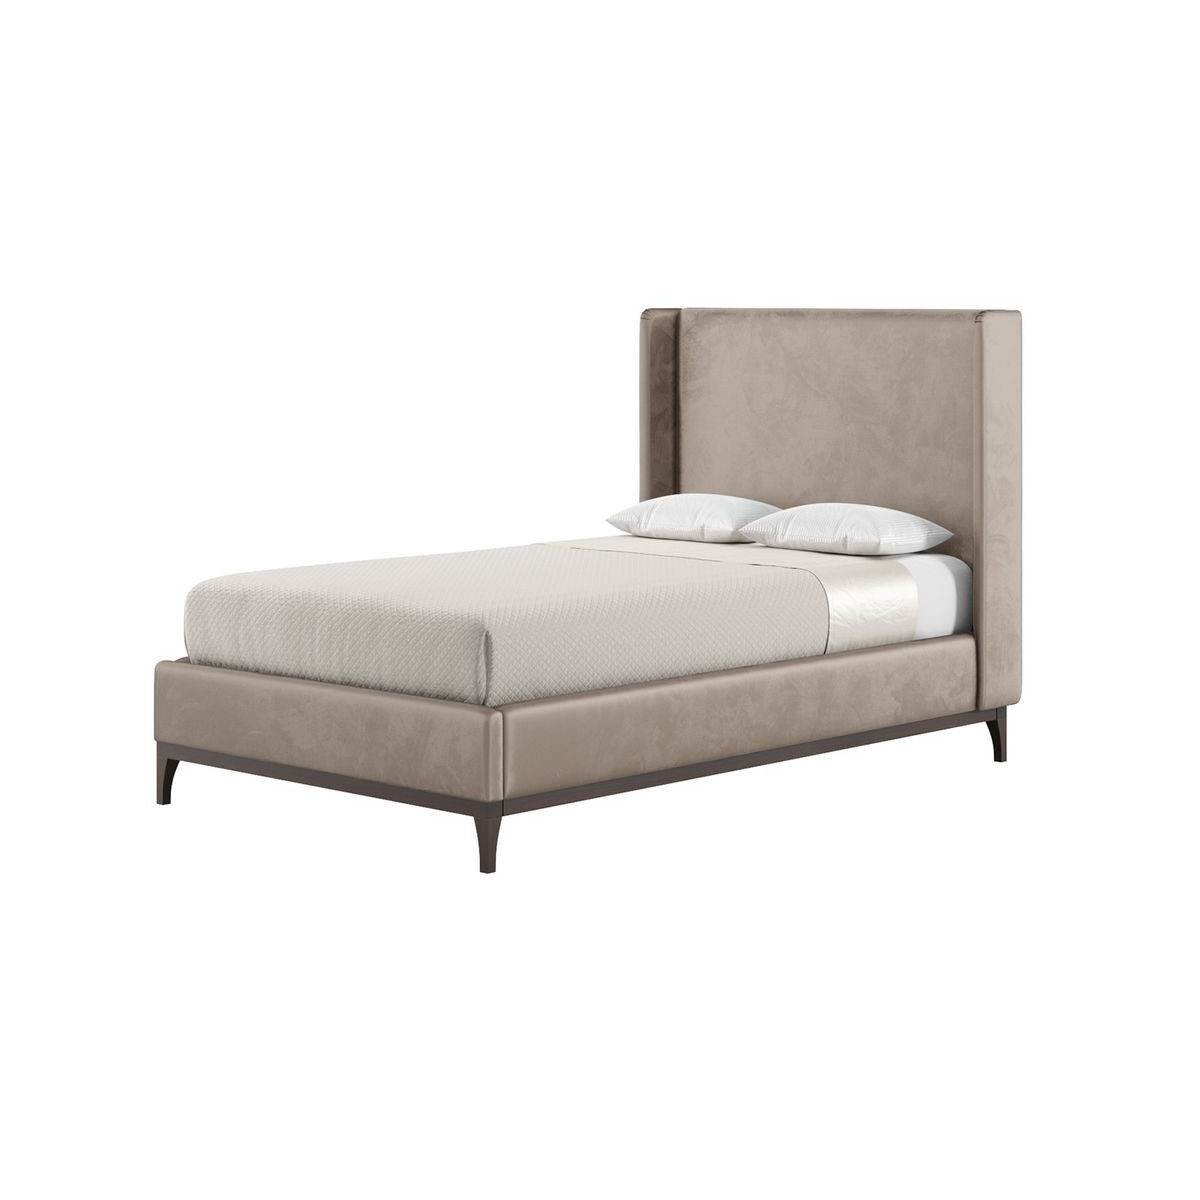 Diane 4ft Small Double Bed Frame with modern smooth wing headboard, mink, Leg colour: dark oak - image 1